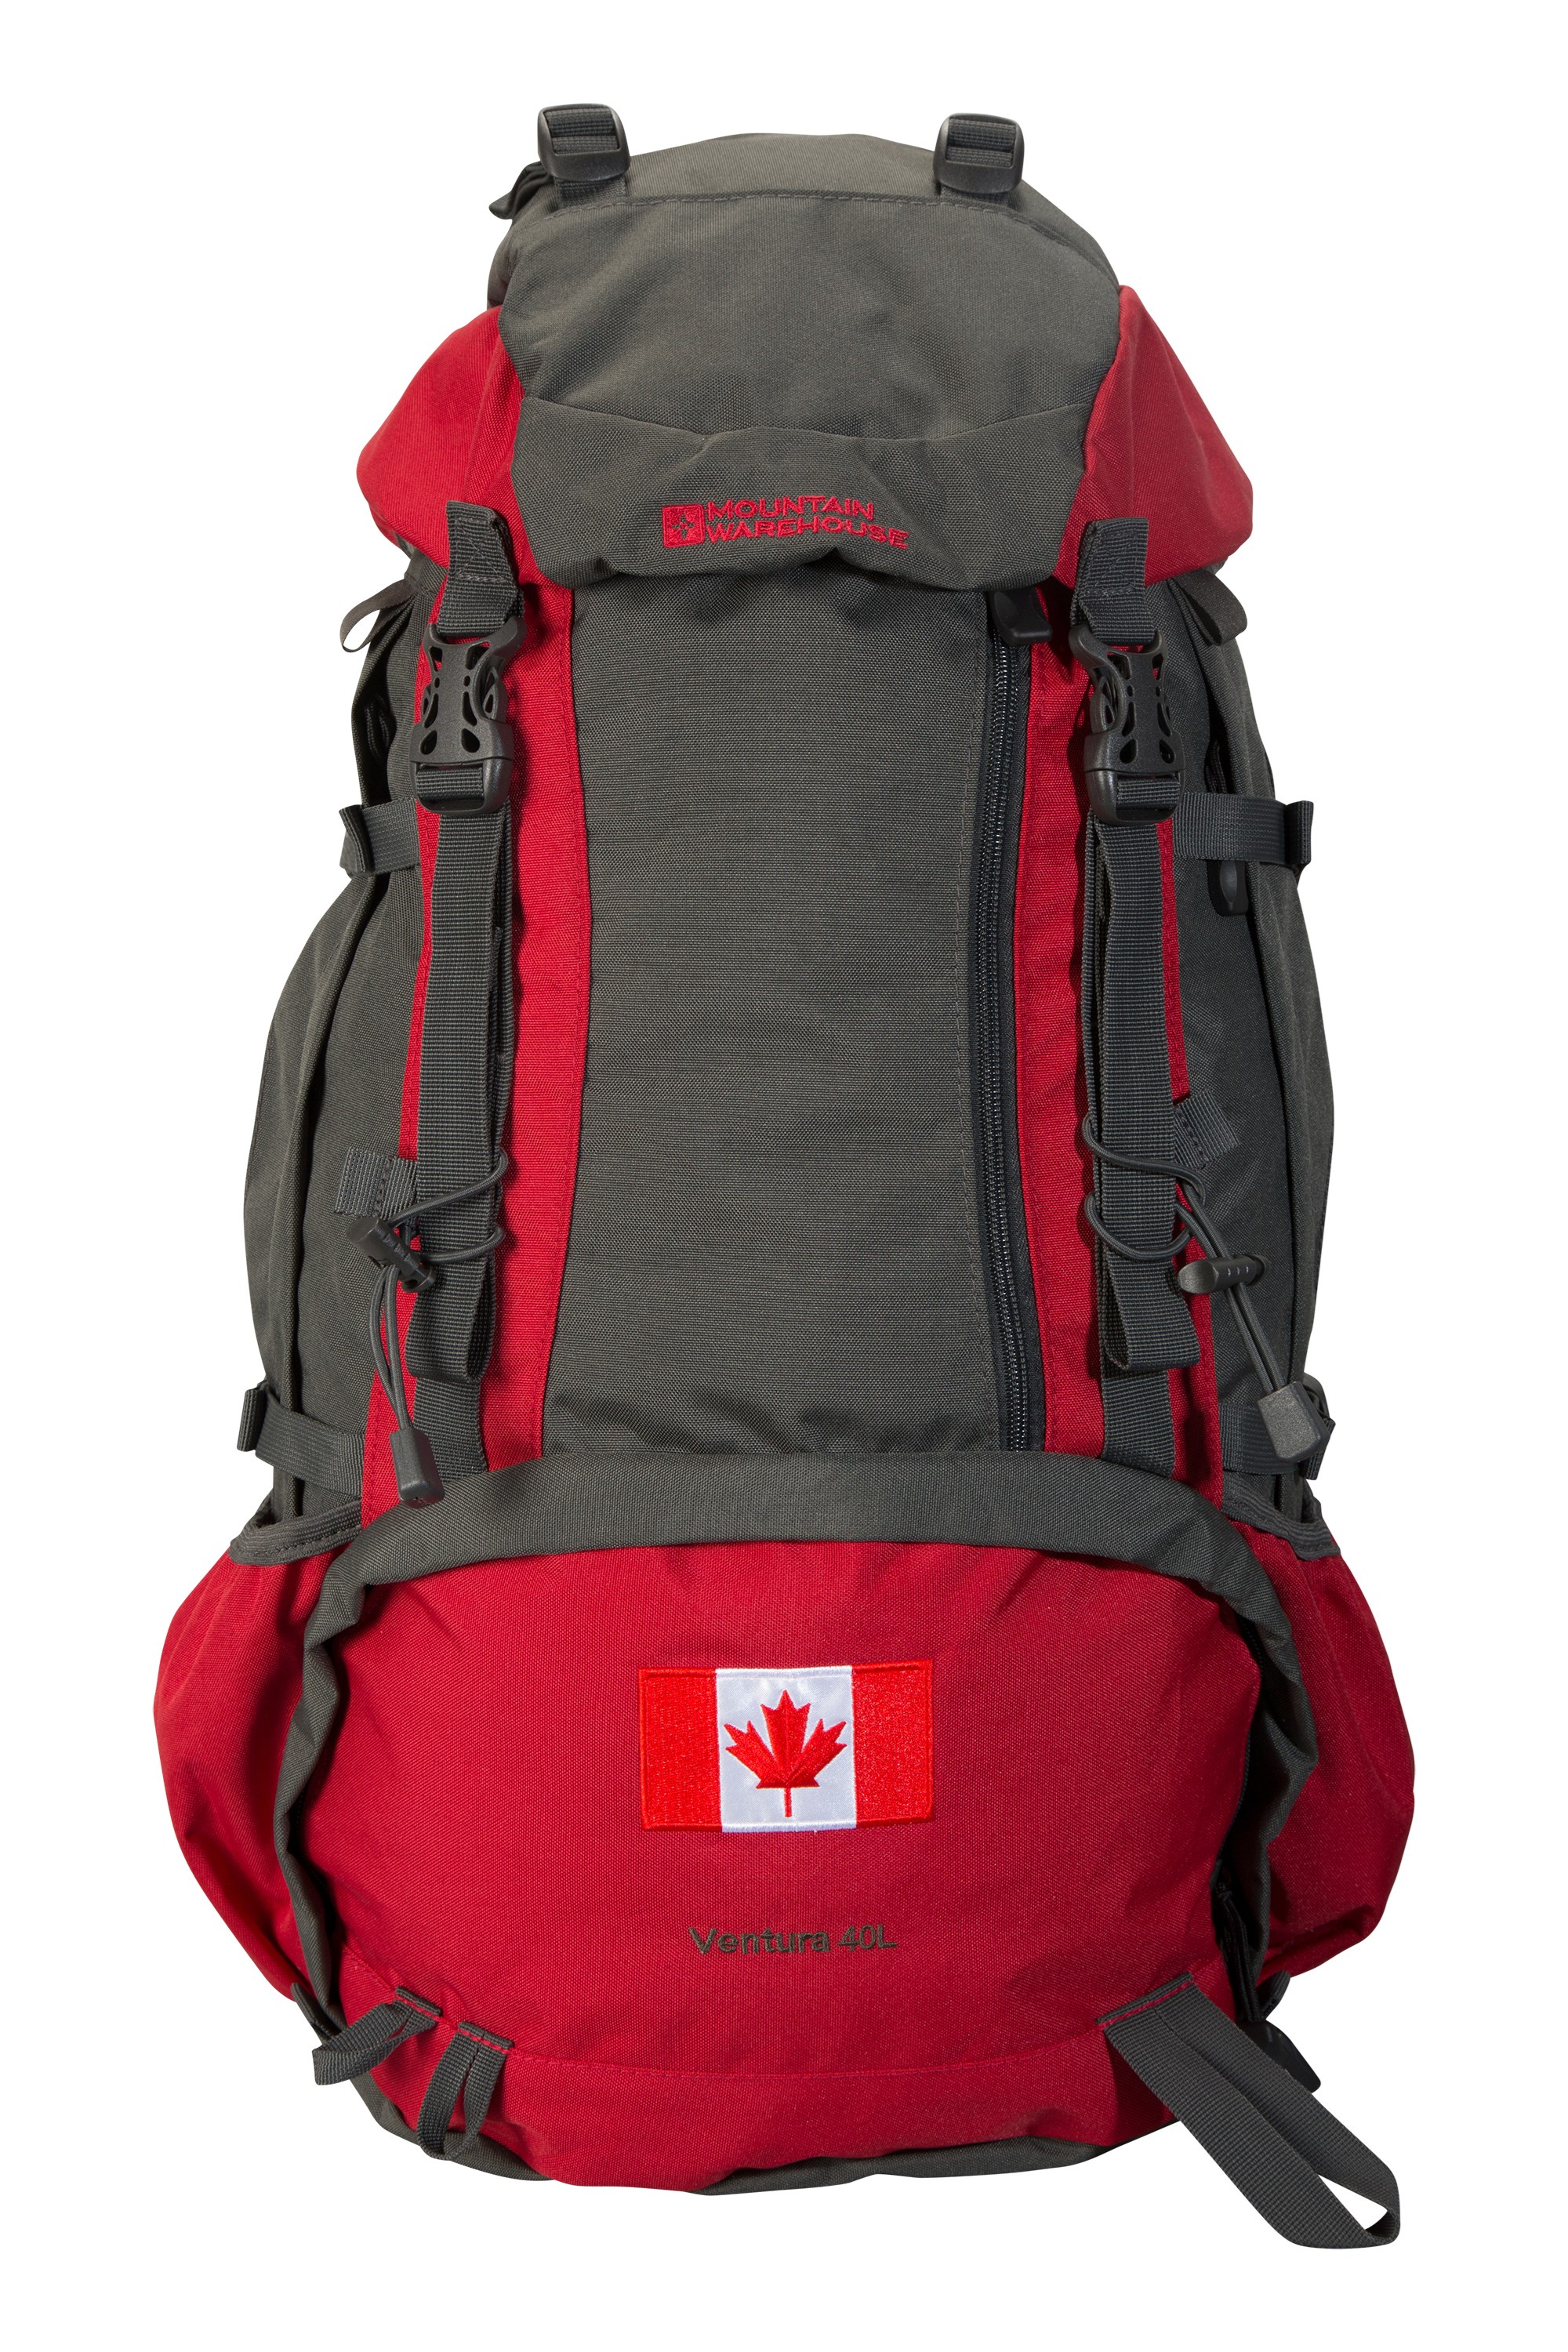 40l Mountain Warehouse Mid Rucksacks Hydration Pack with Airflow Back System 